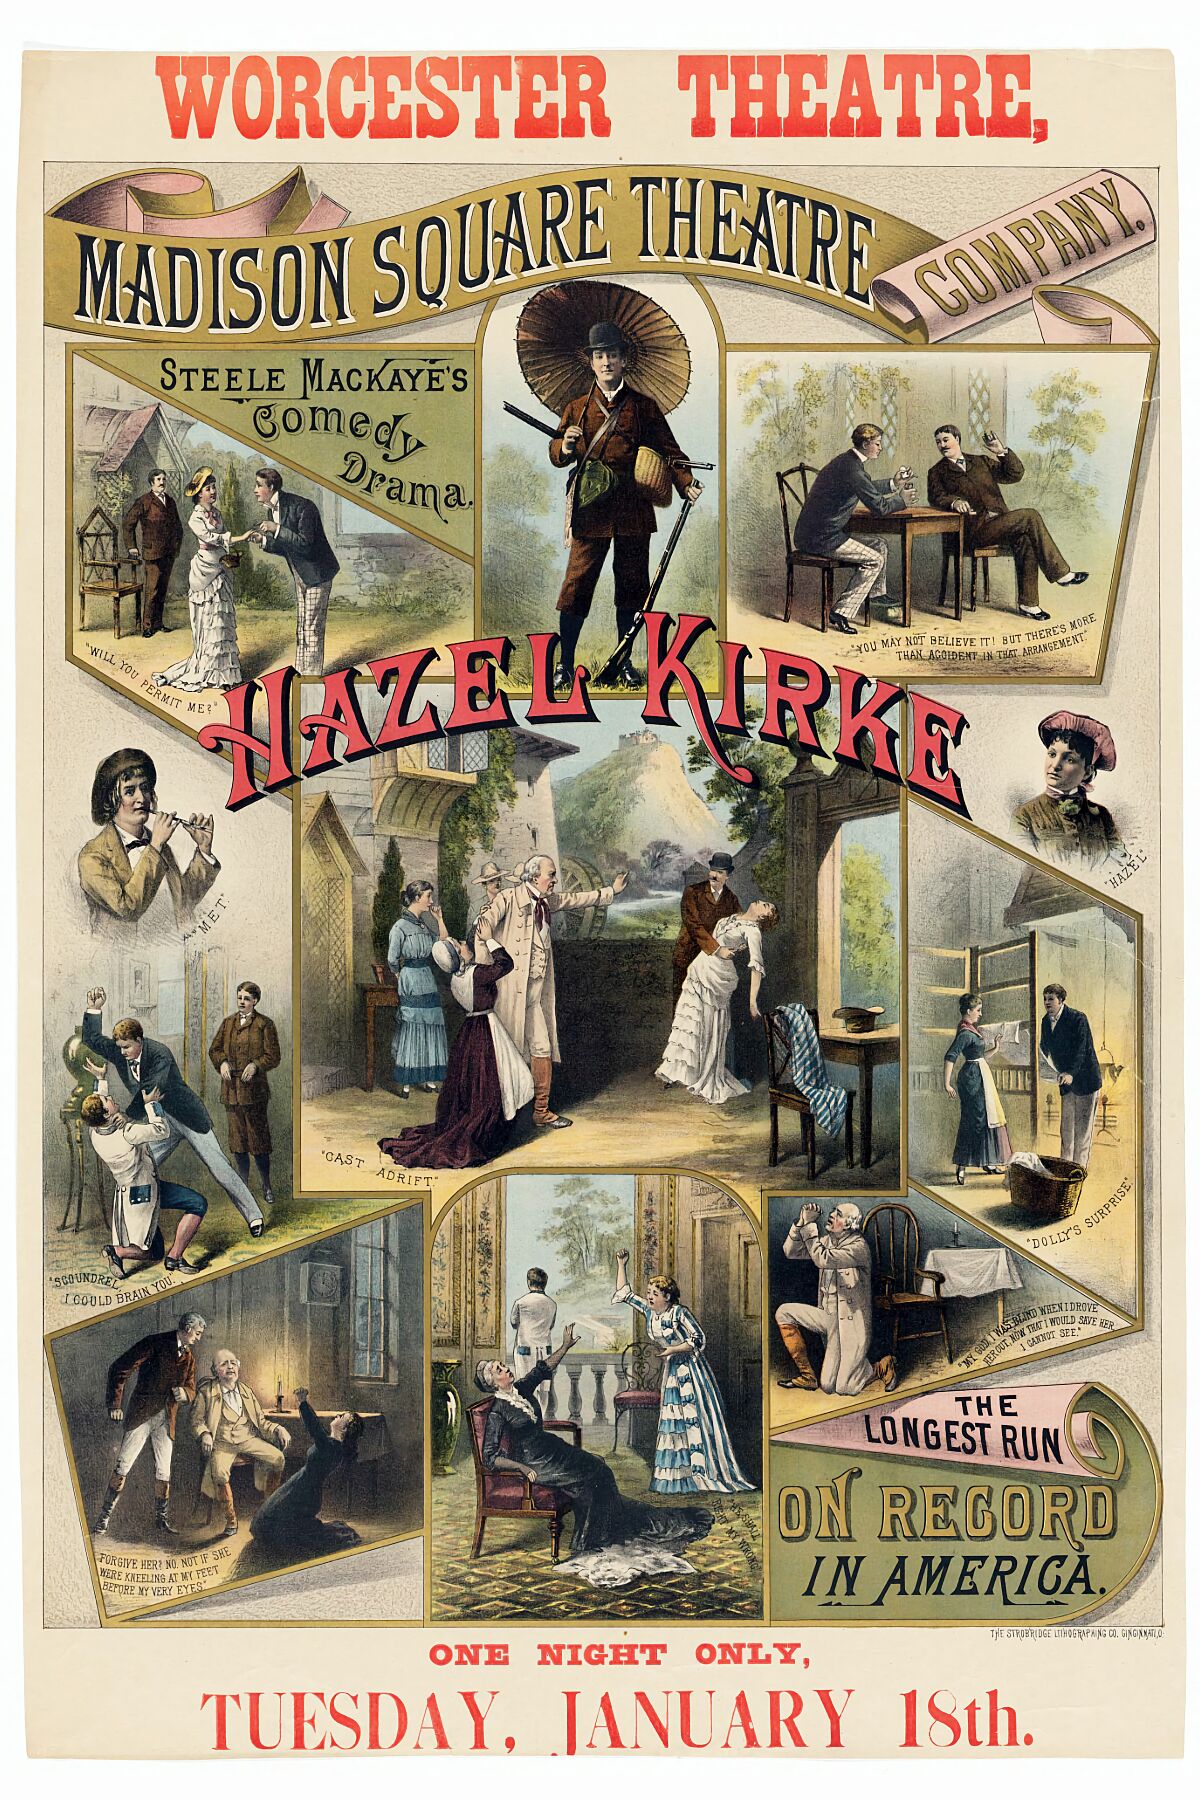 Poster for the performance of Hazel Kirke by Steele MacKaye presented by the Madison Square Theatre Company in Worcester Theatre on January 18, [no year, but likely 1881